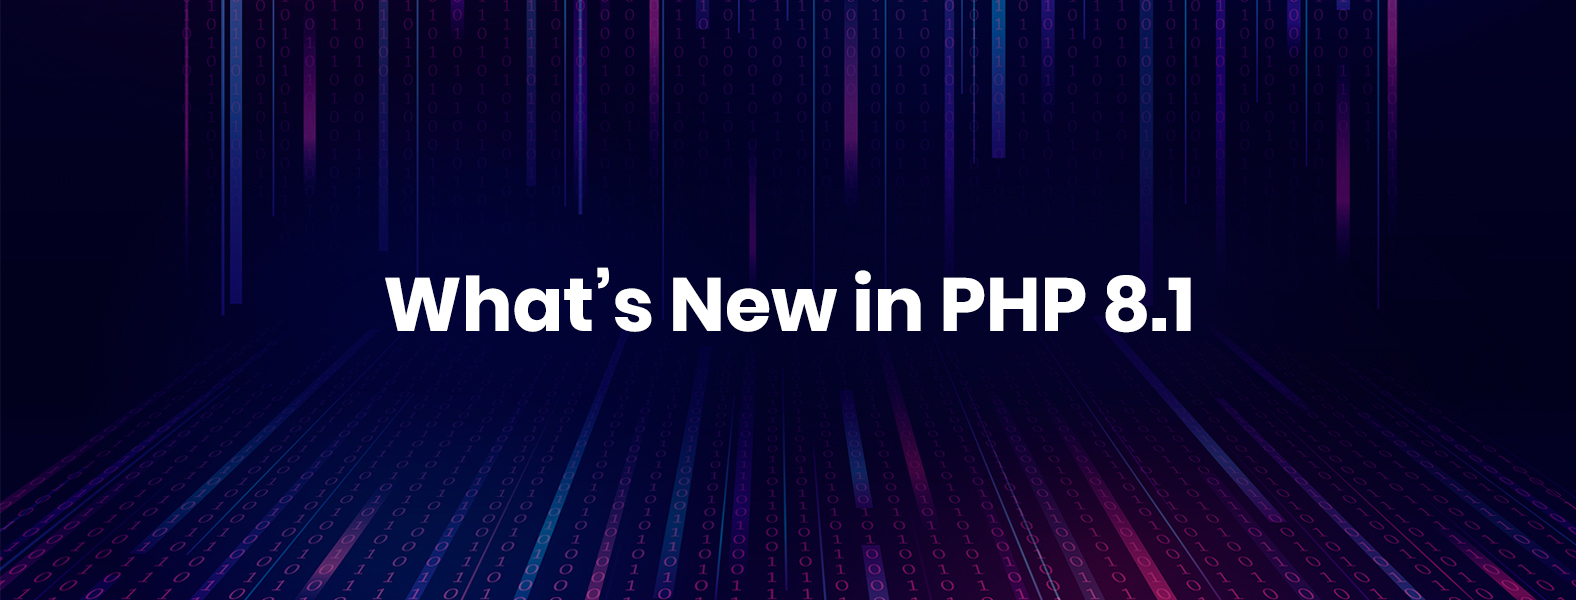 PHP 8.1 Analysis |  A Look at its Features & Updates